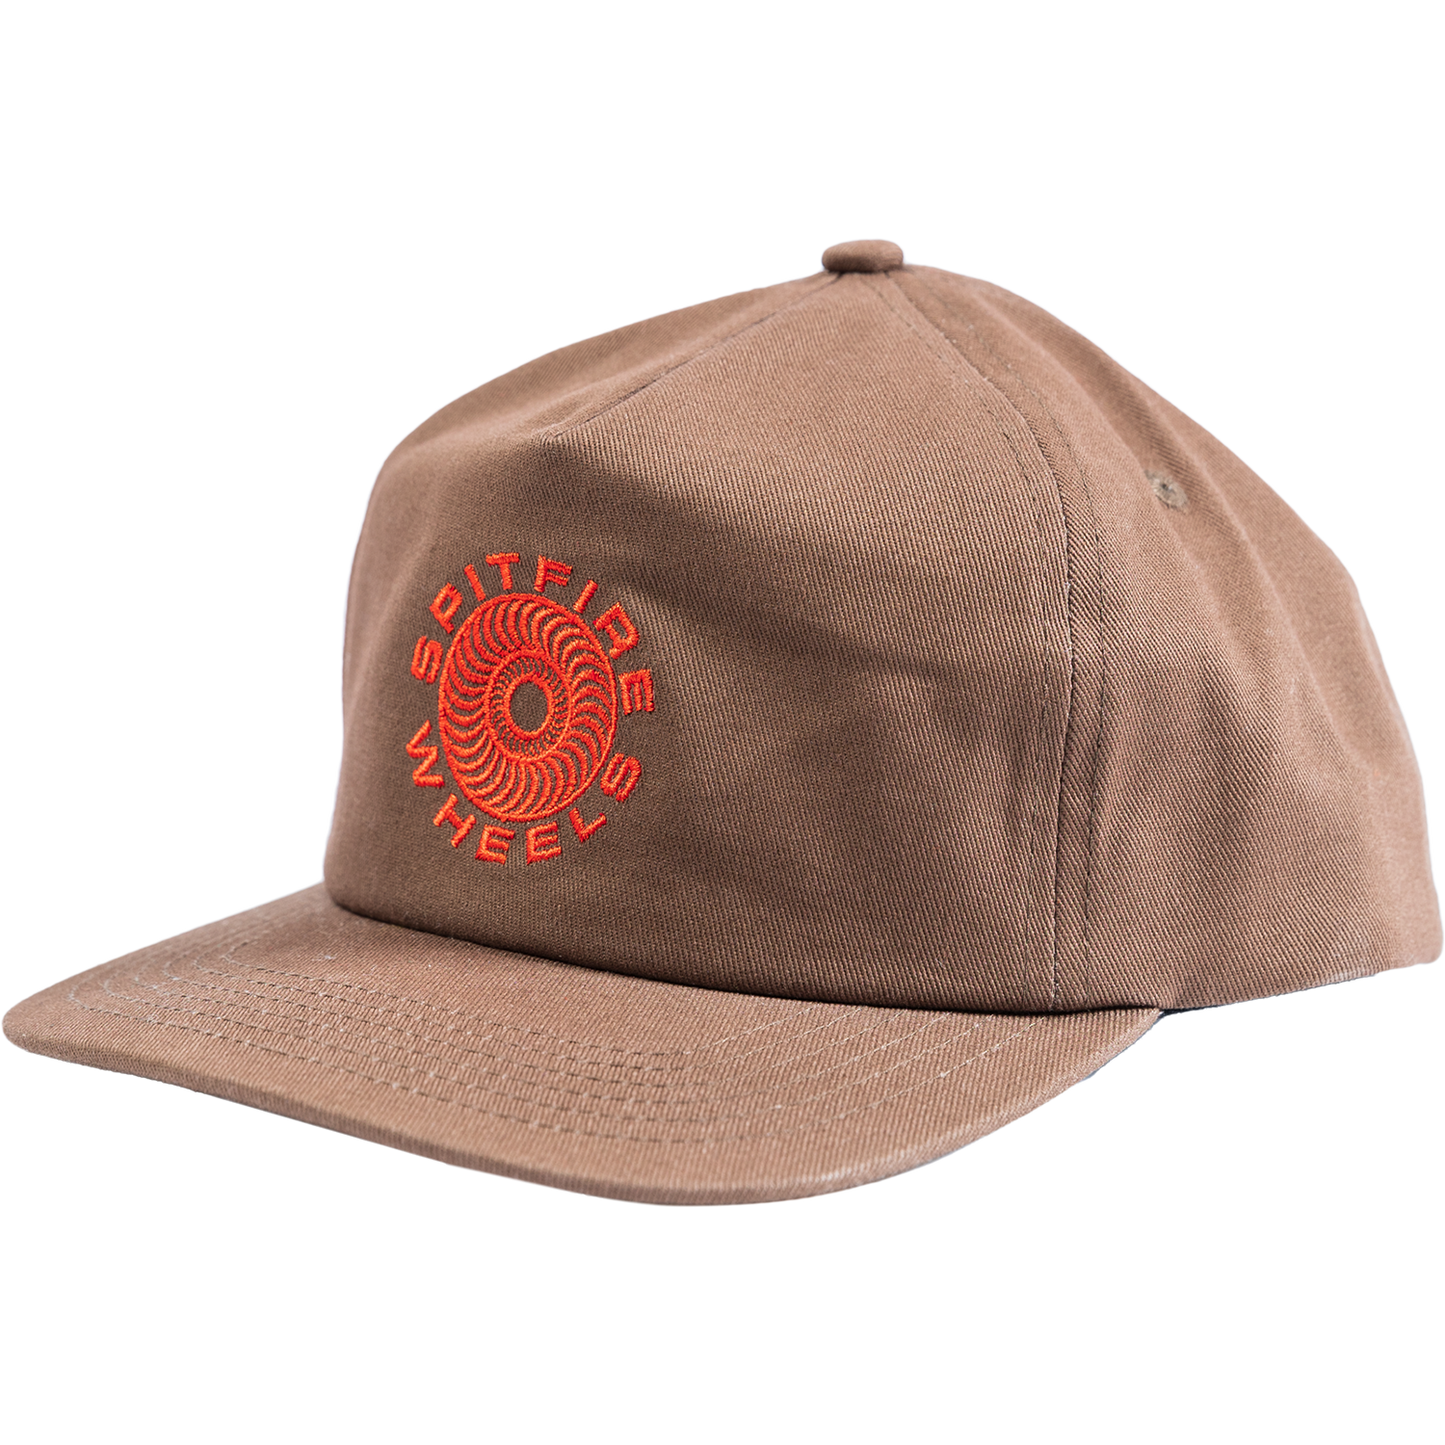 Spitfire Classic 87 Swirl Patch Snapback Hat, Brownl/Red